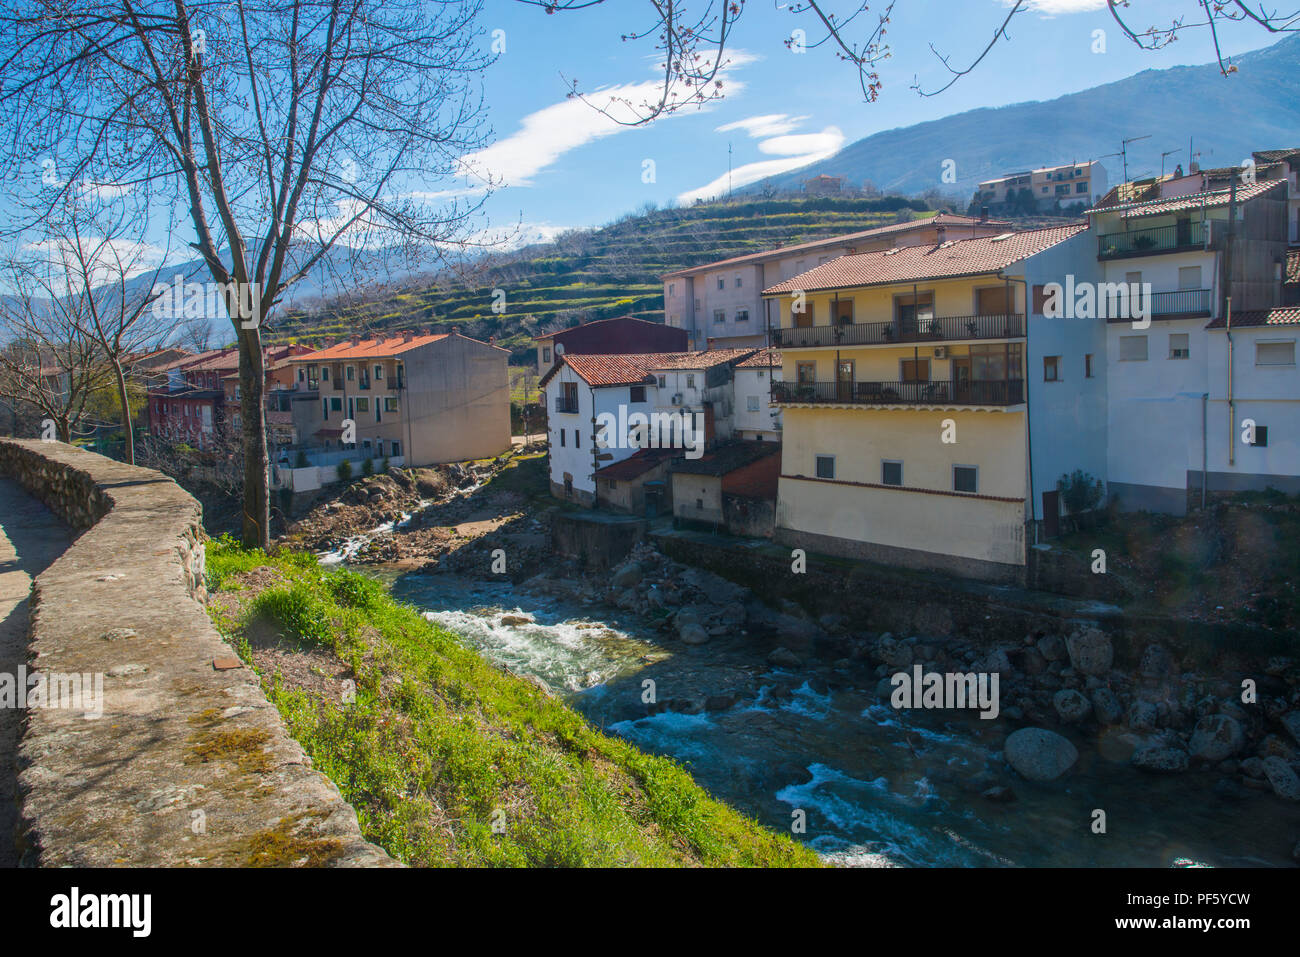 River Jerte and the village. Cabezuela del valle, Caceres province, Extremadura, Spain. Stock Photo